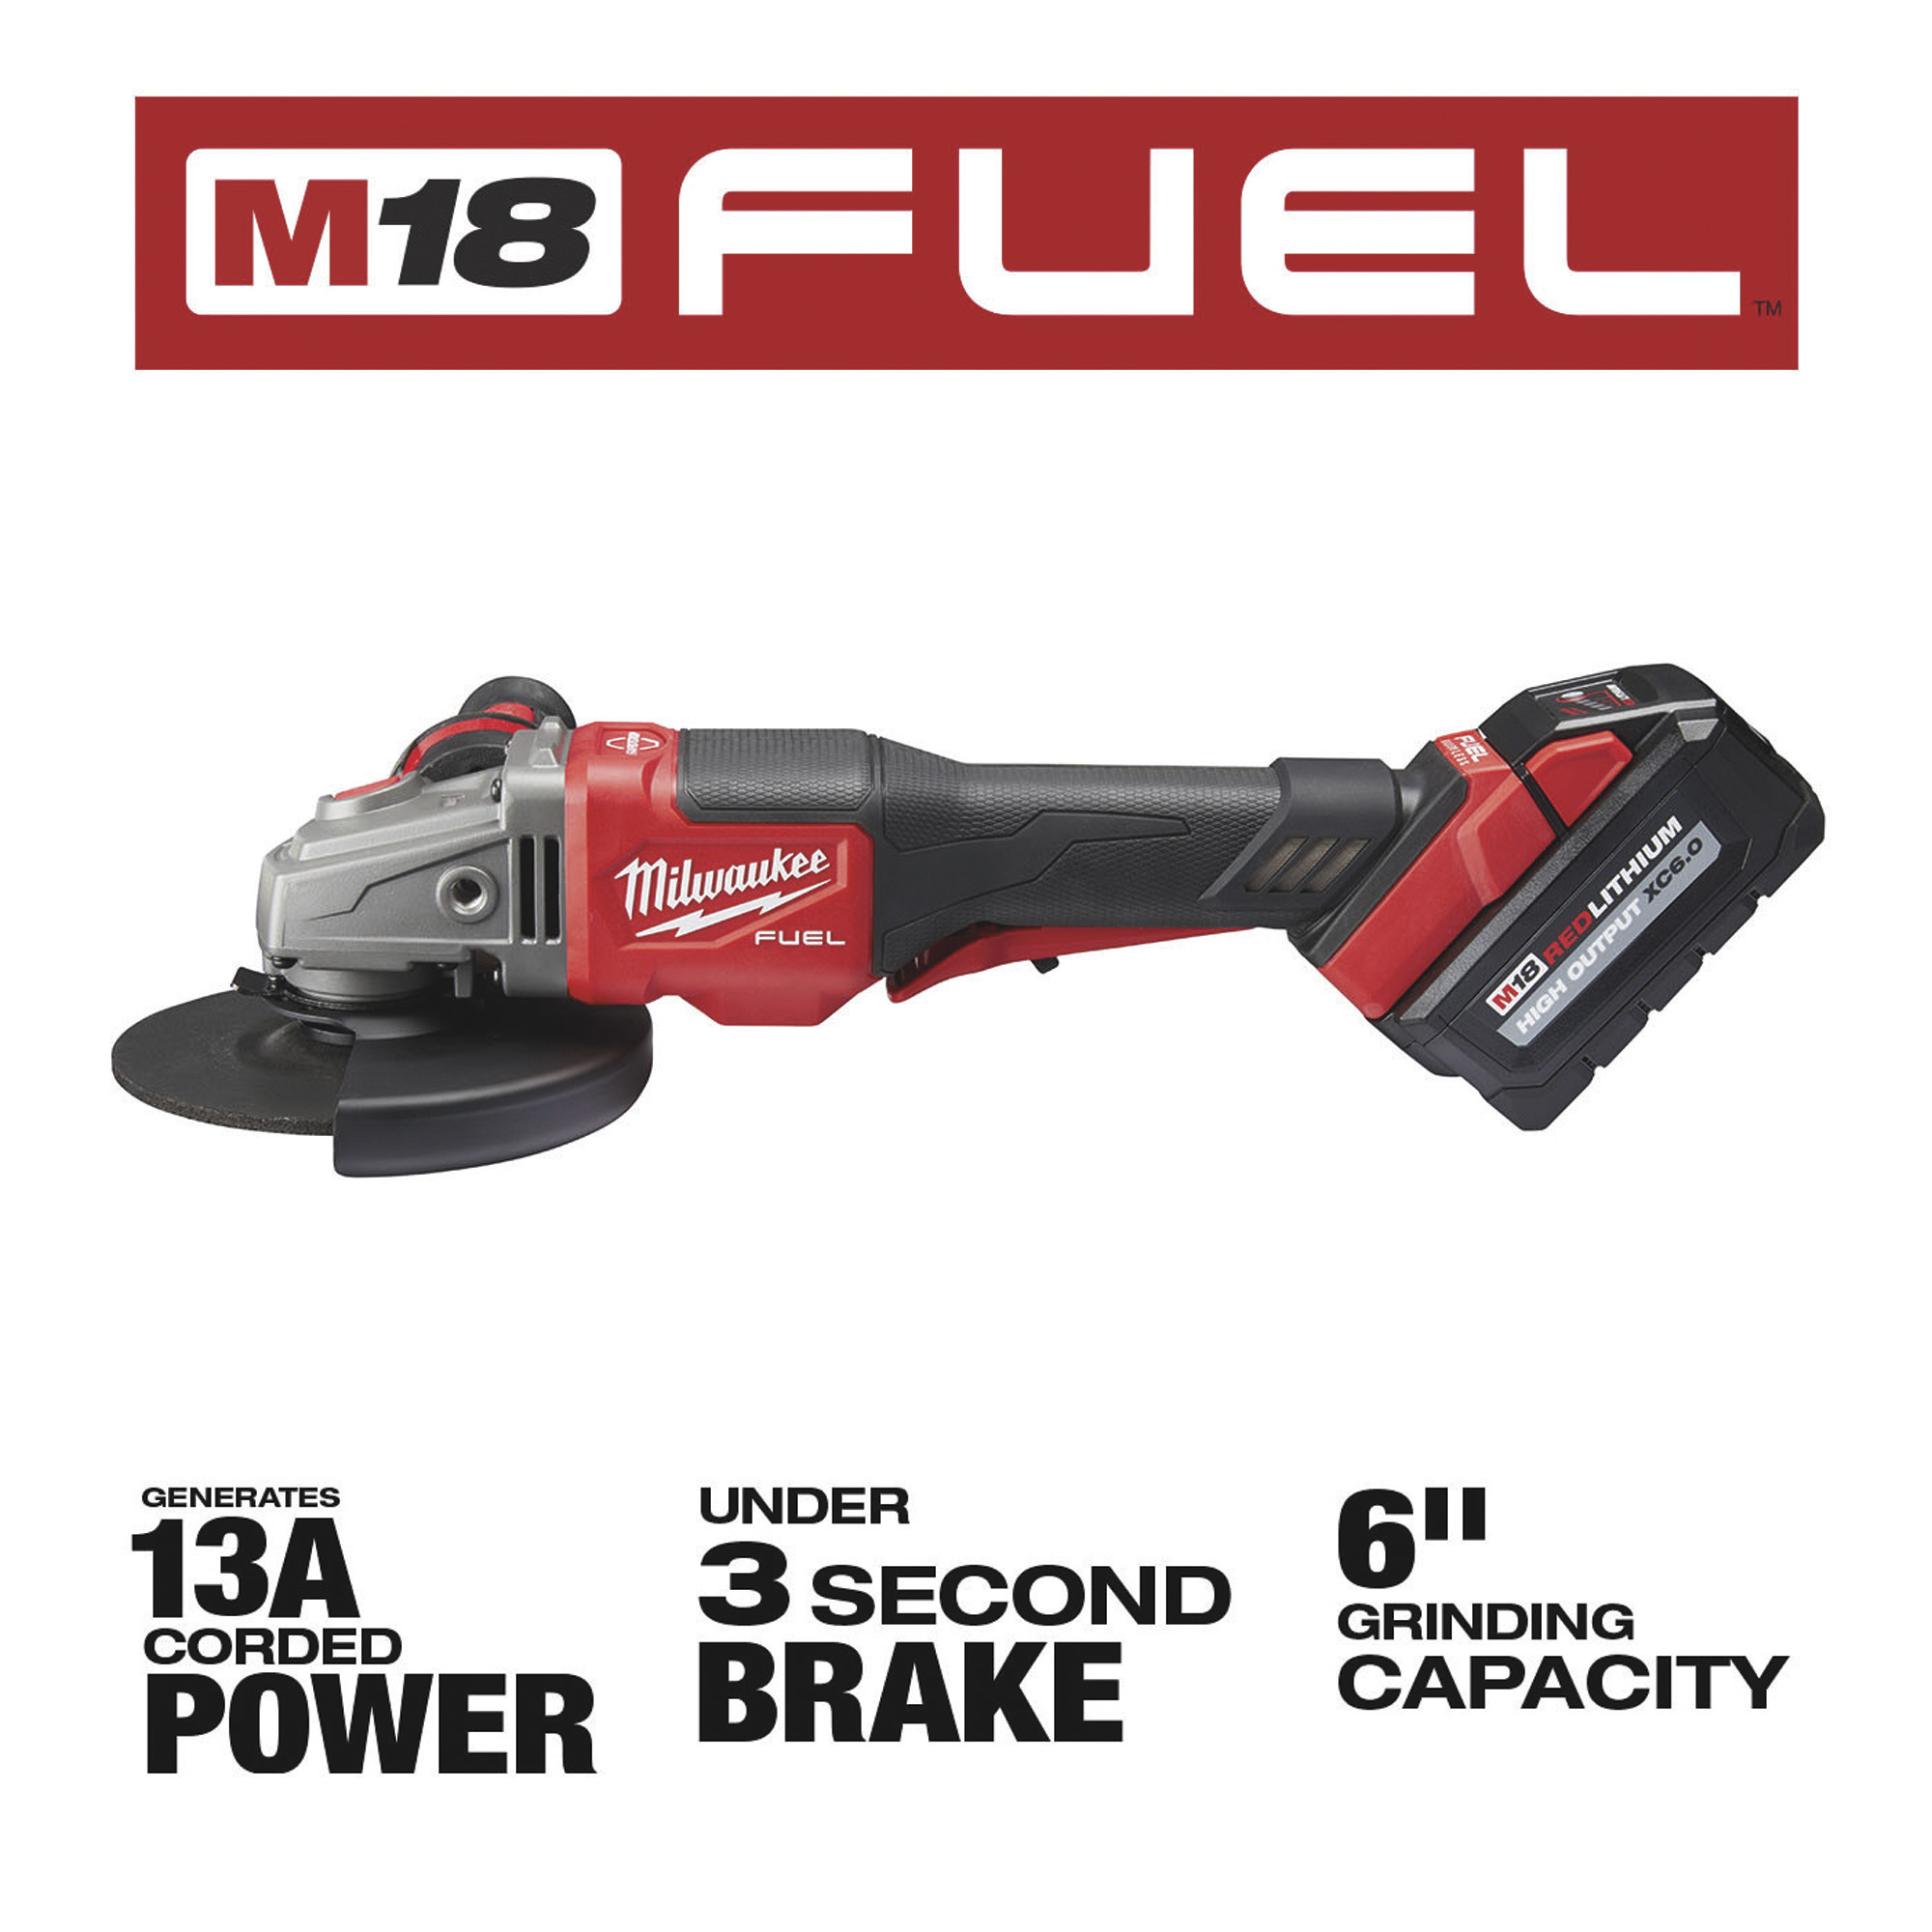 Milwaukee M18 FUEL Cordless 1/2in. – 6in. Braking Grinder Kit —  Batteries, Paddle Switch, No-Lock, Model# 2980-22 Northern Tool